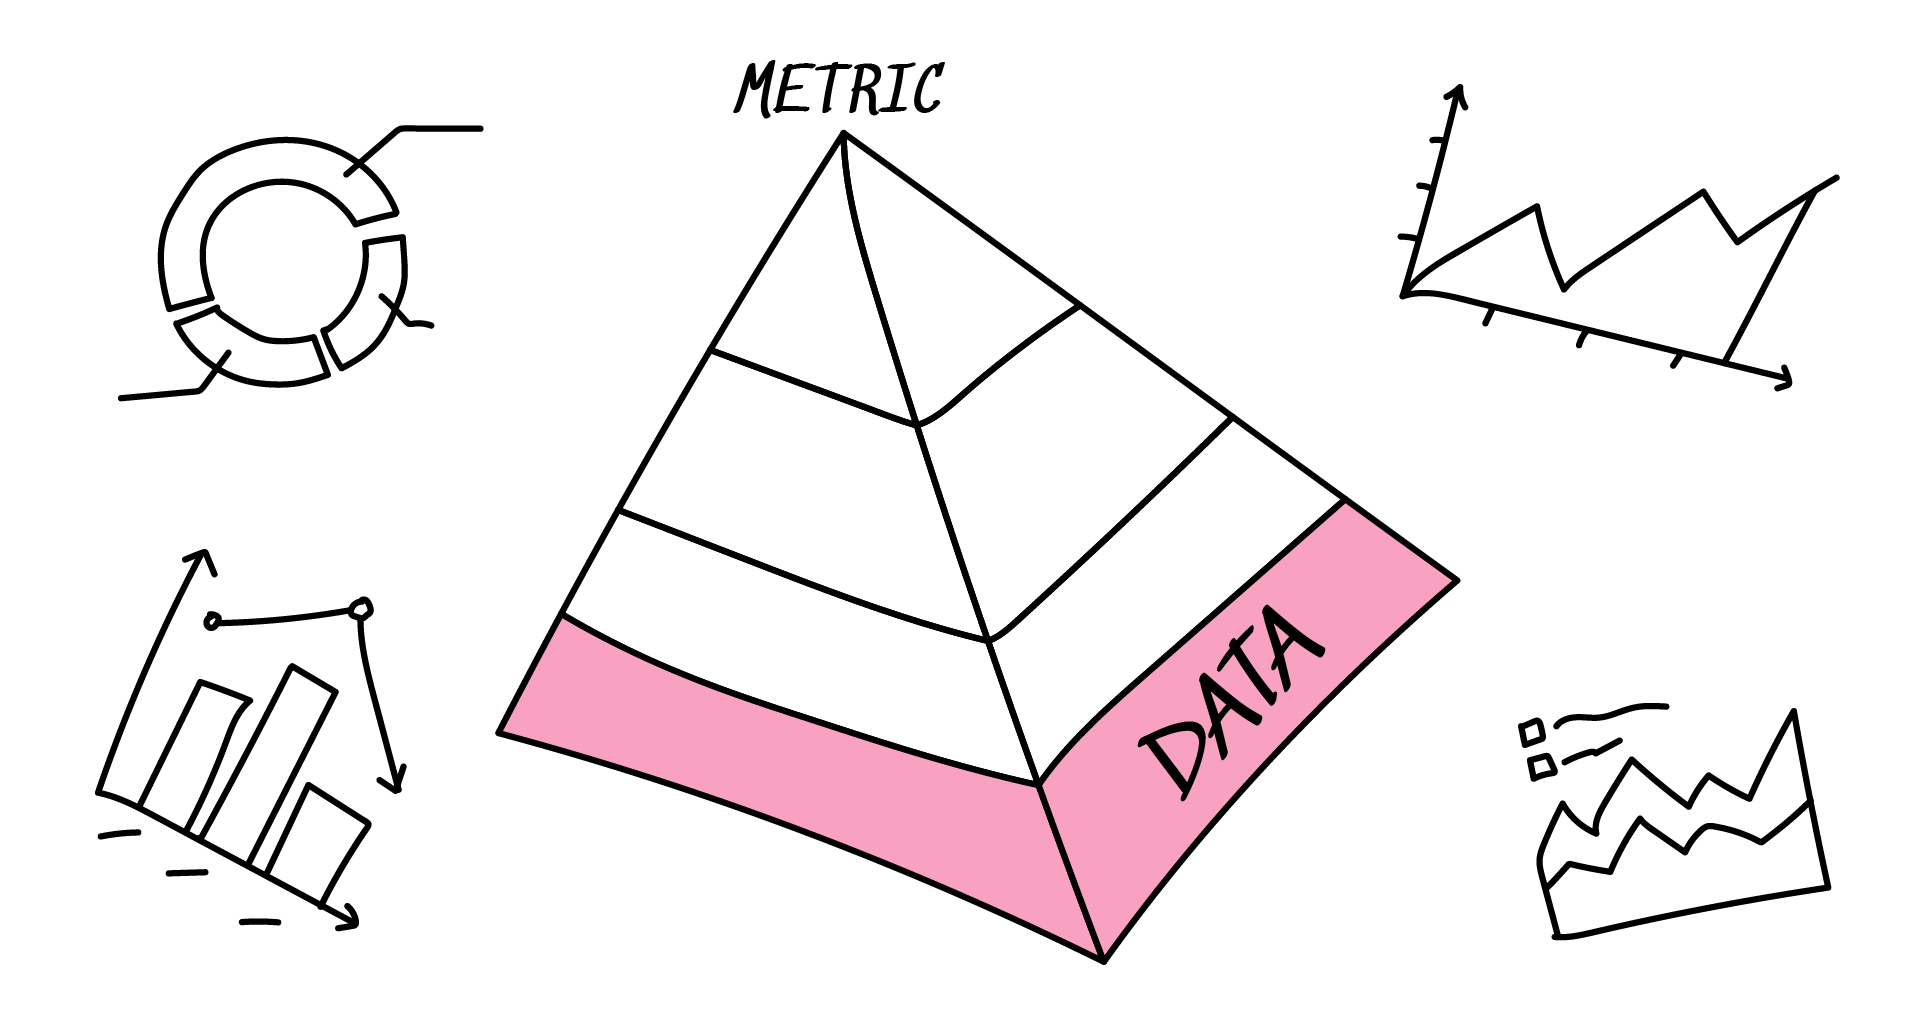 Gathering data for the metric